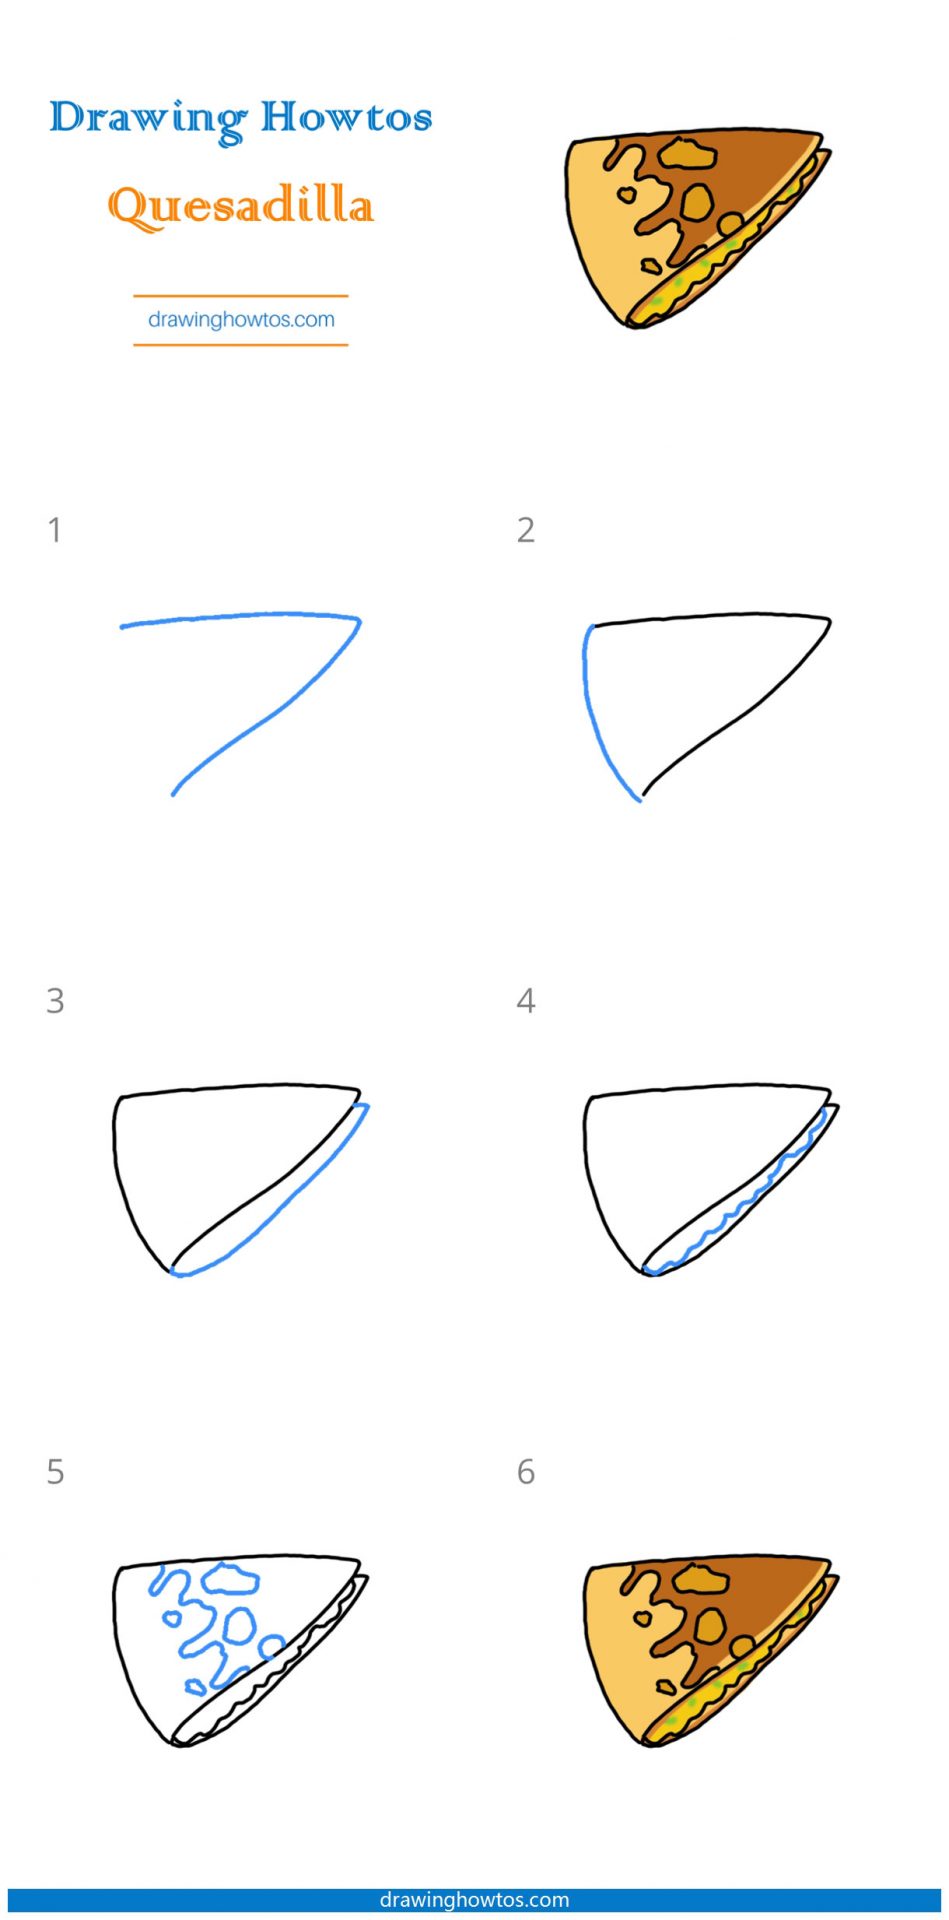 How to Draw a Slice of Quesadilla Step by Step